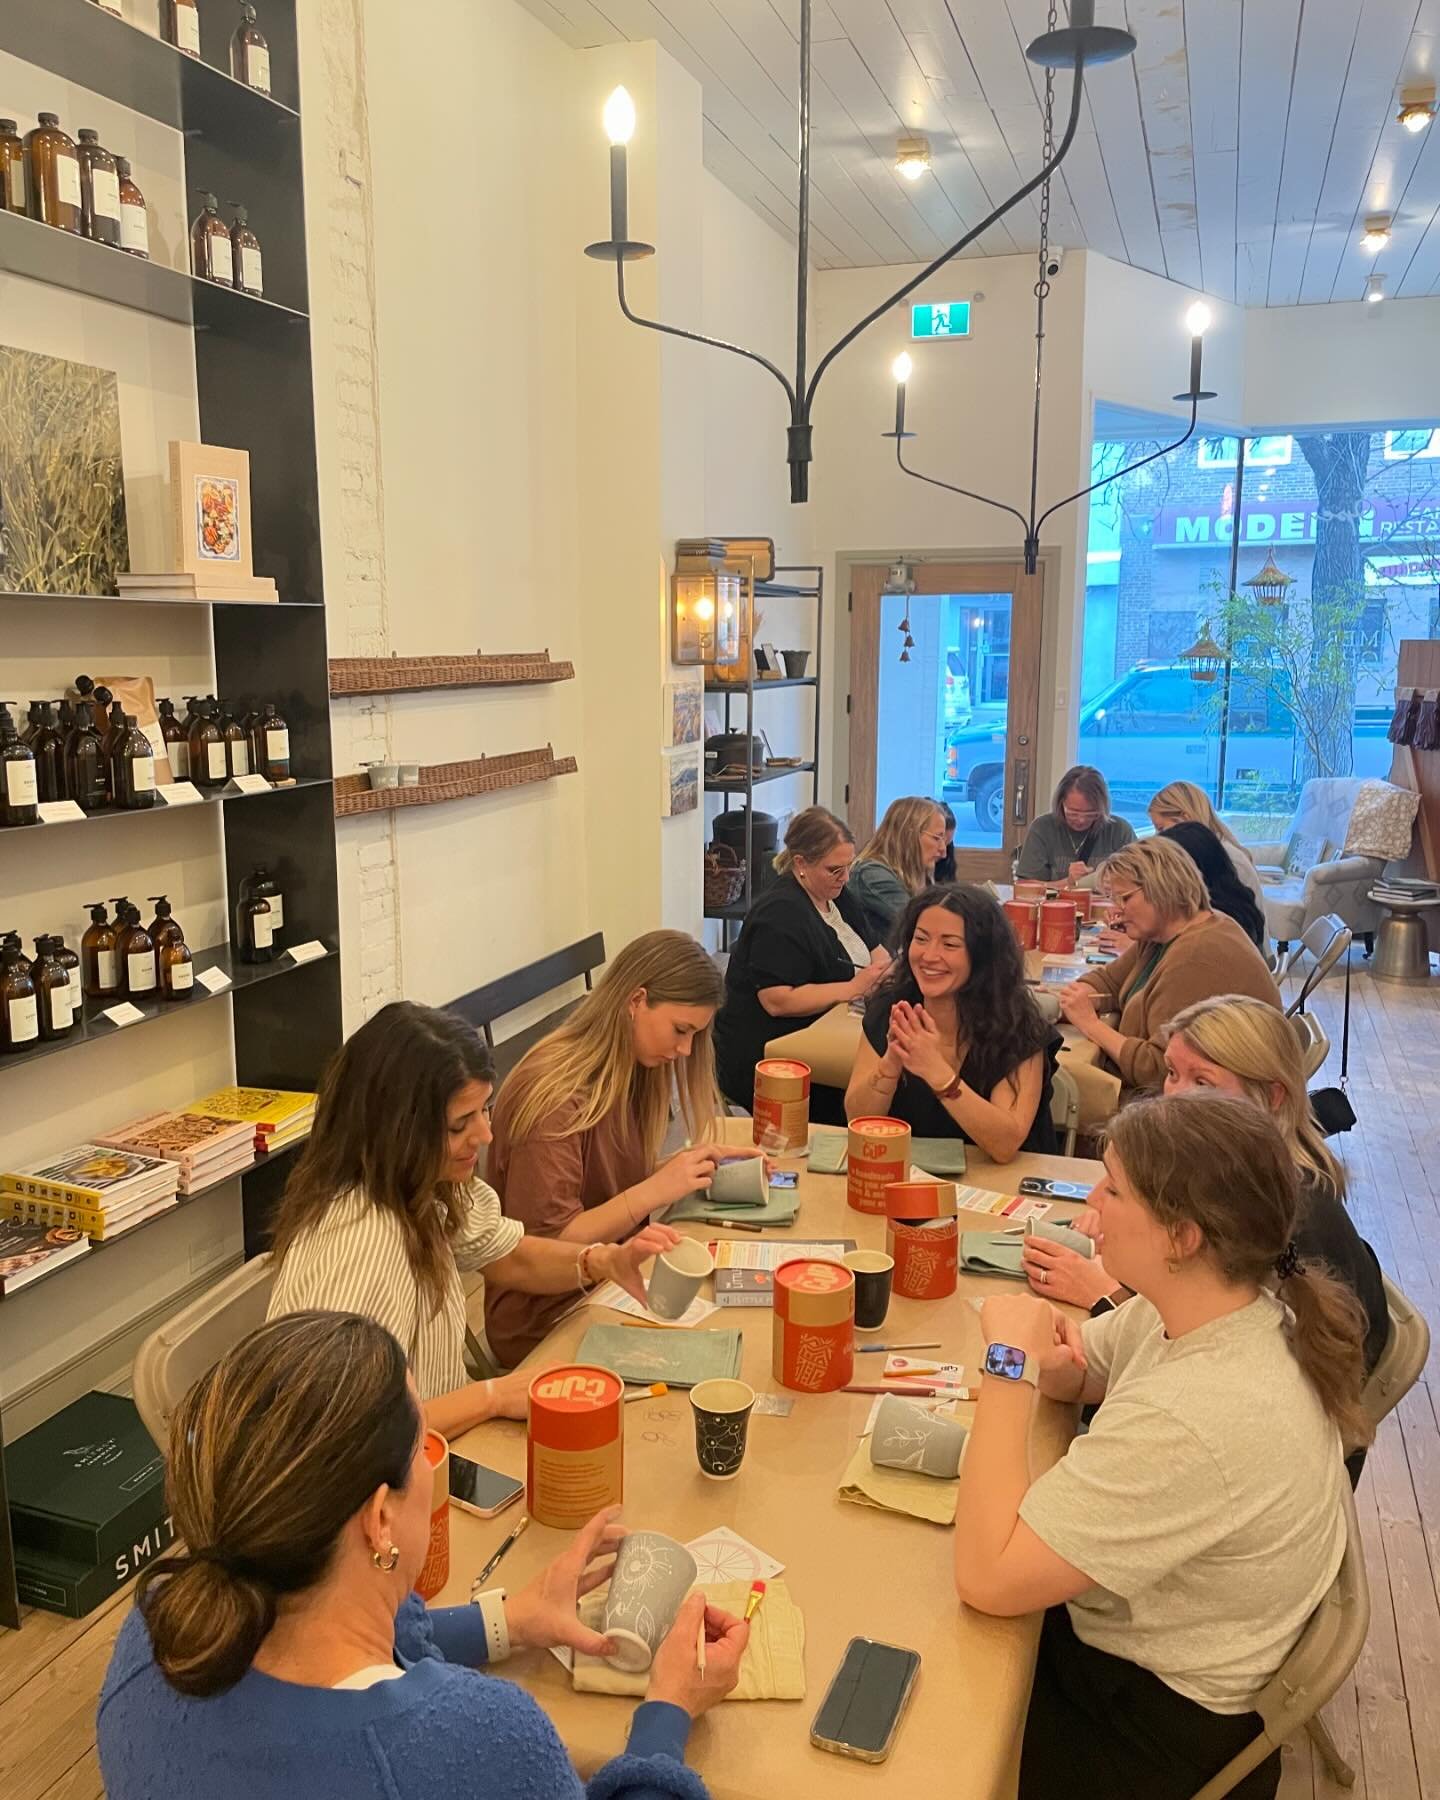 2 lovely evenings of meeting and making. 🌪️ &hearts;️
Thank you to @farmersdaughterhomestead for hosting The People&rsquo;s Cup as one of your cultivating community workshops. Your store is an absolute gem 💎. I encourage everyone driving by Swift C